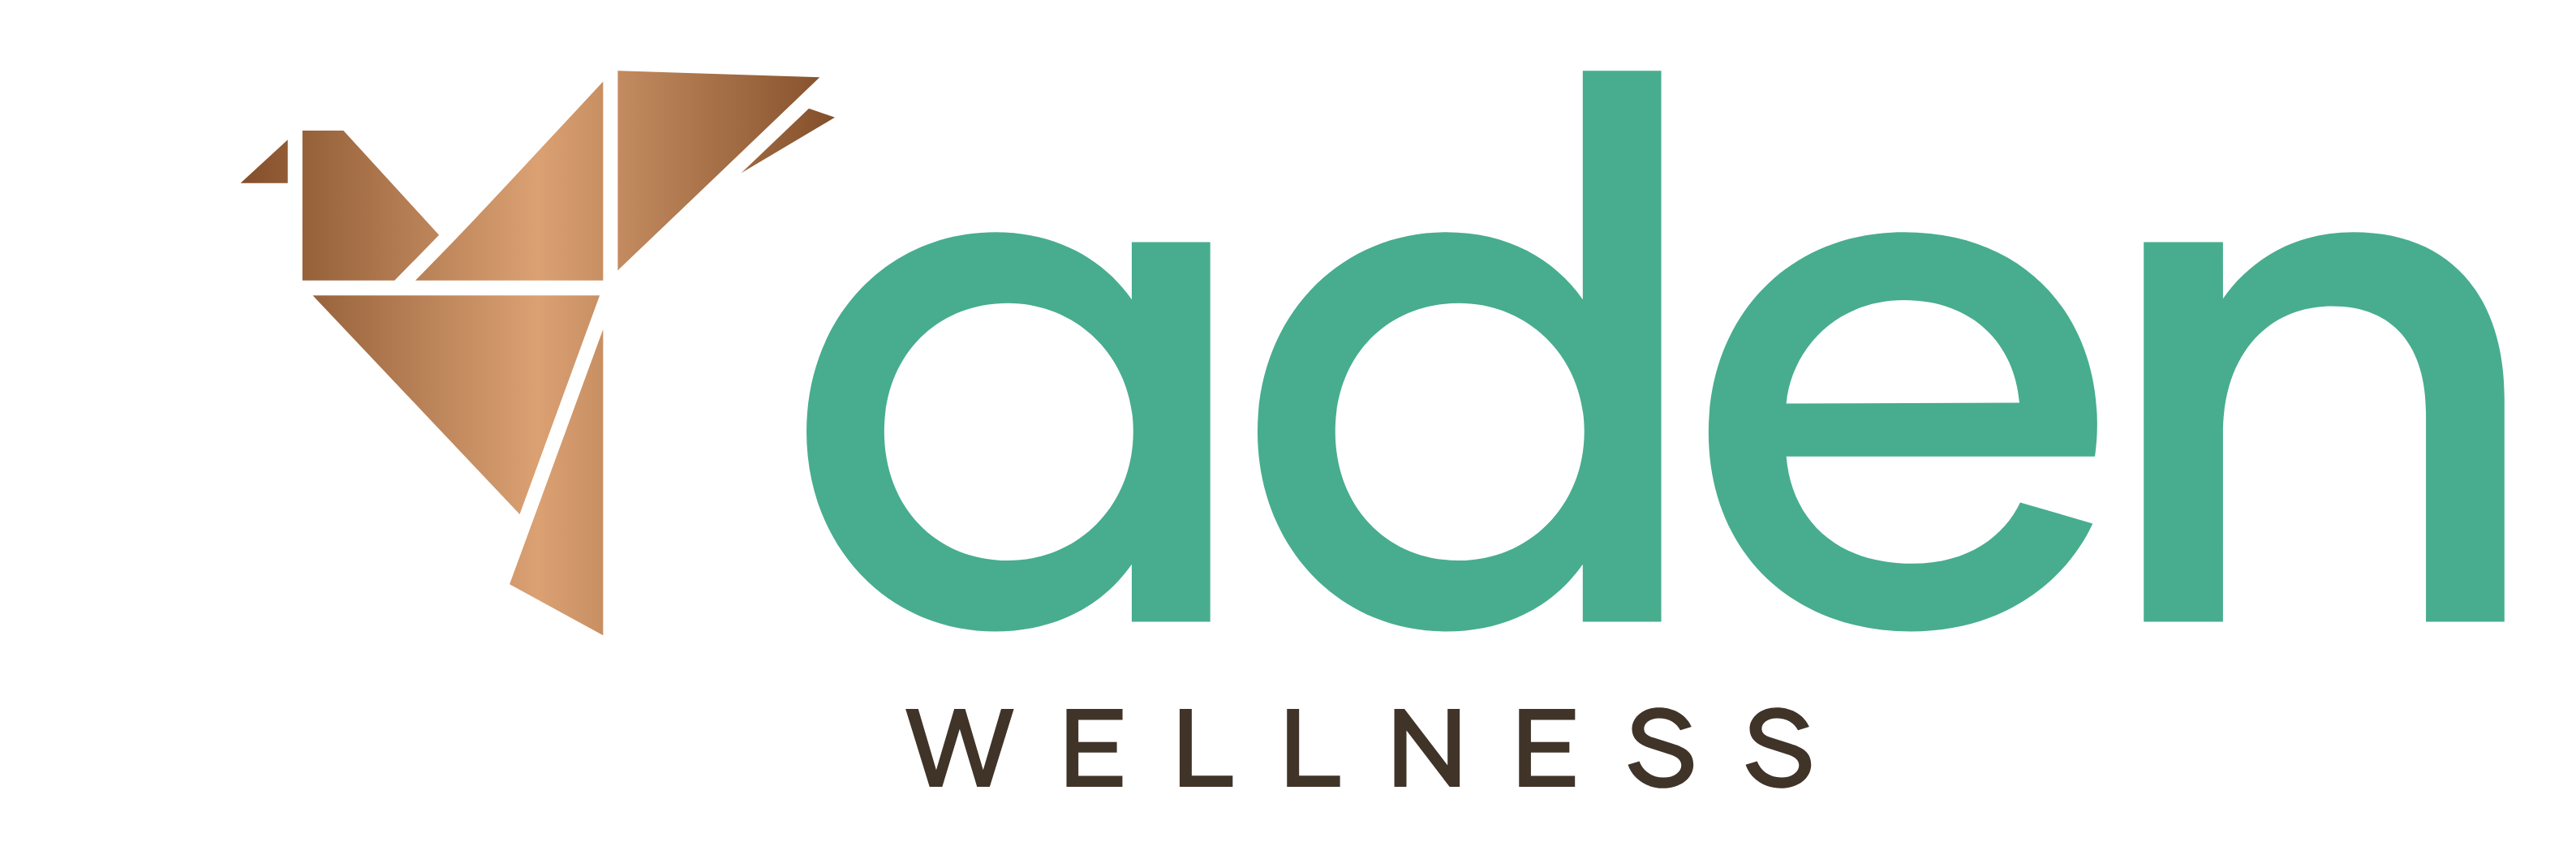 logo with bird image and Aden Wellness title